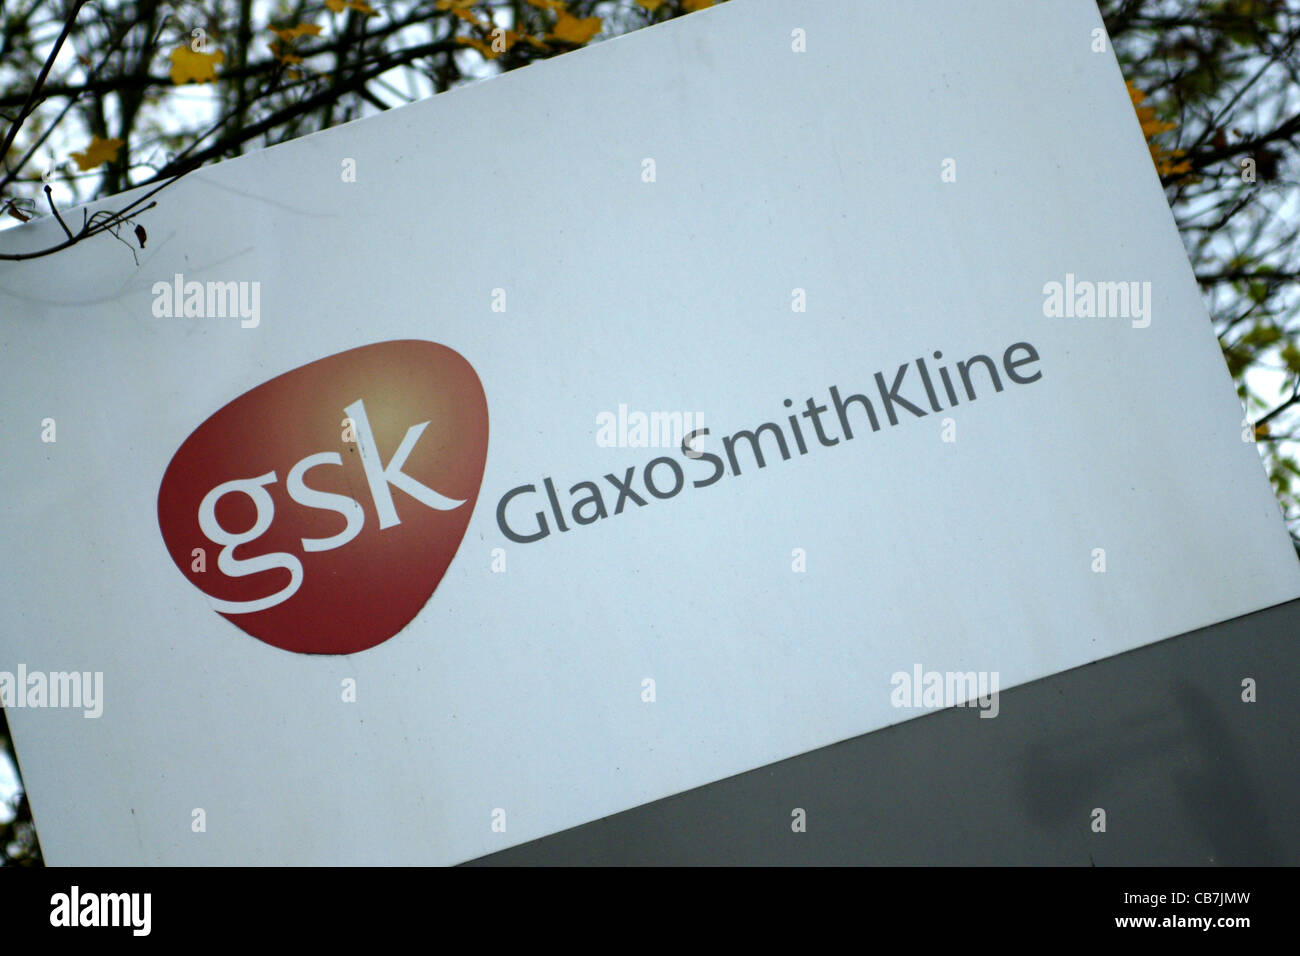 Company logos and signs at the GSK Glaxo factory in Ware, England Stock Photo